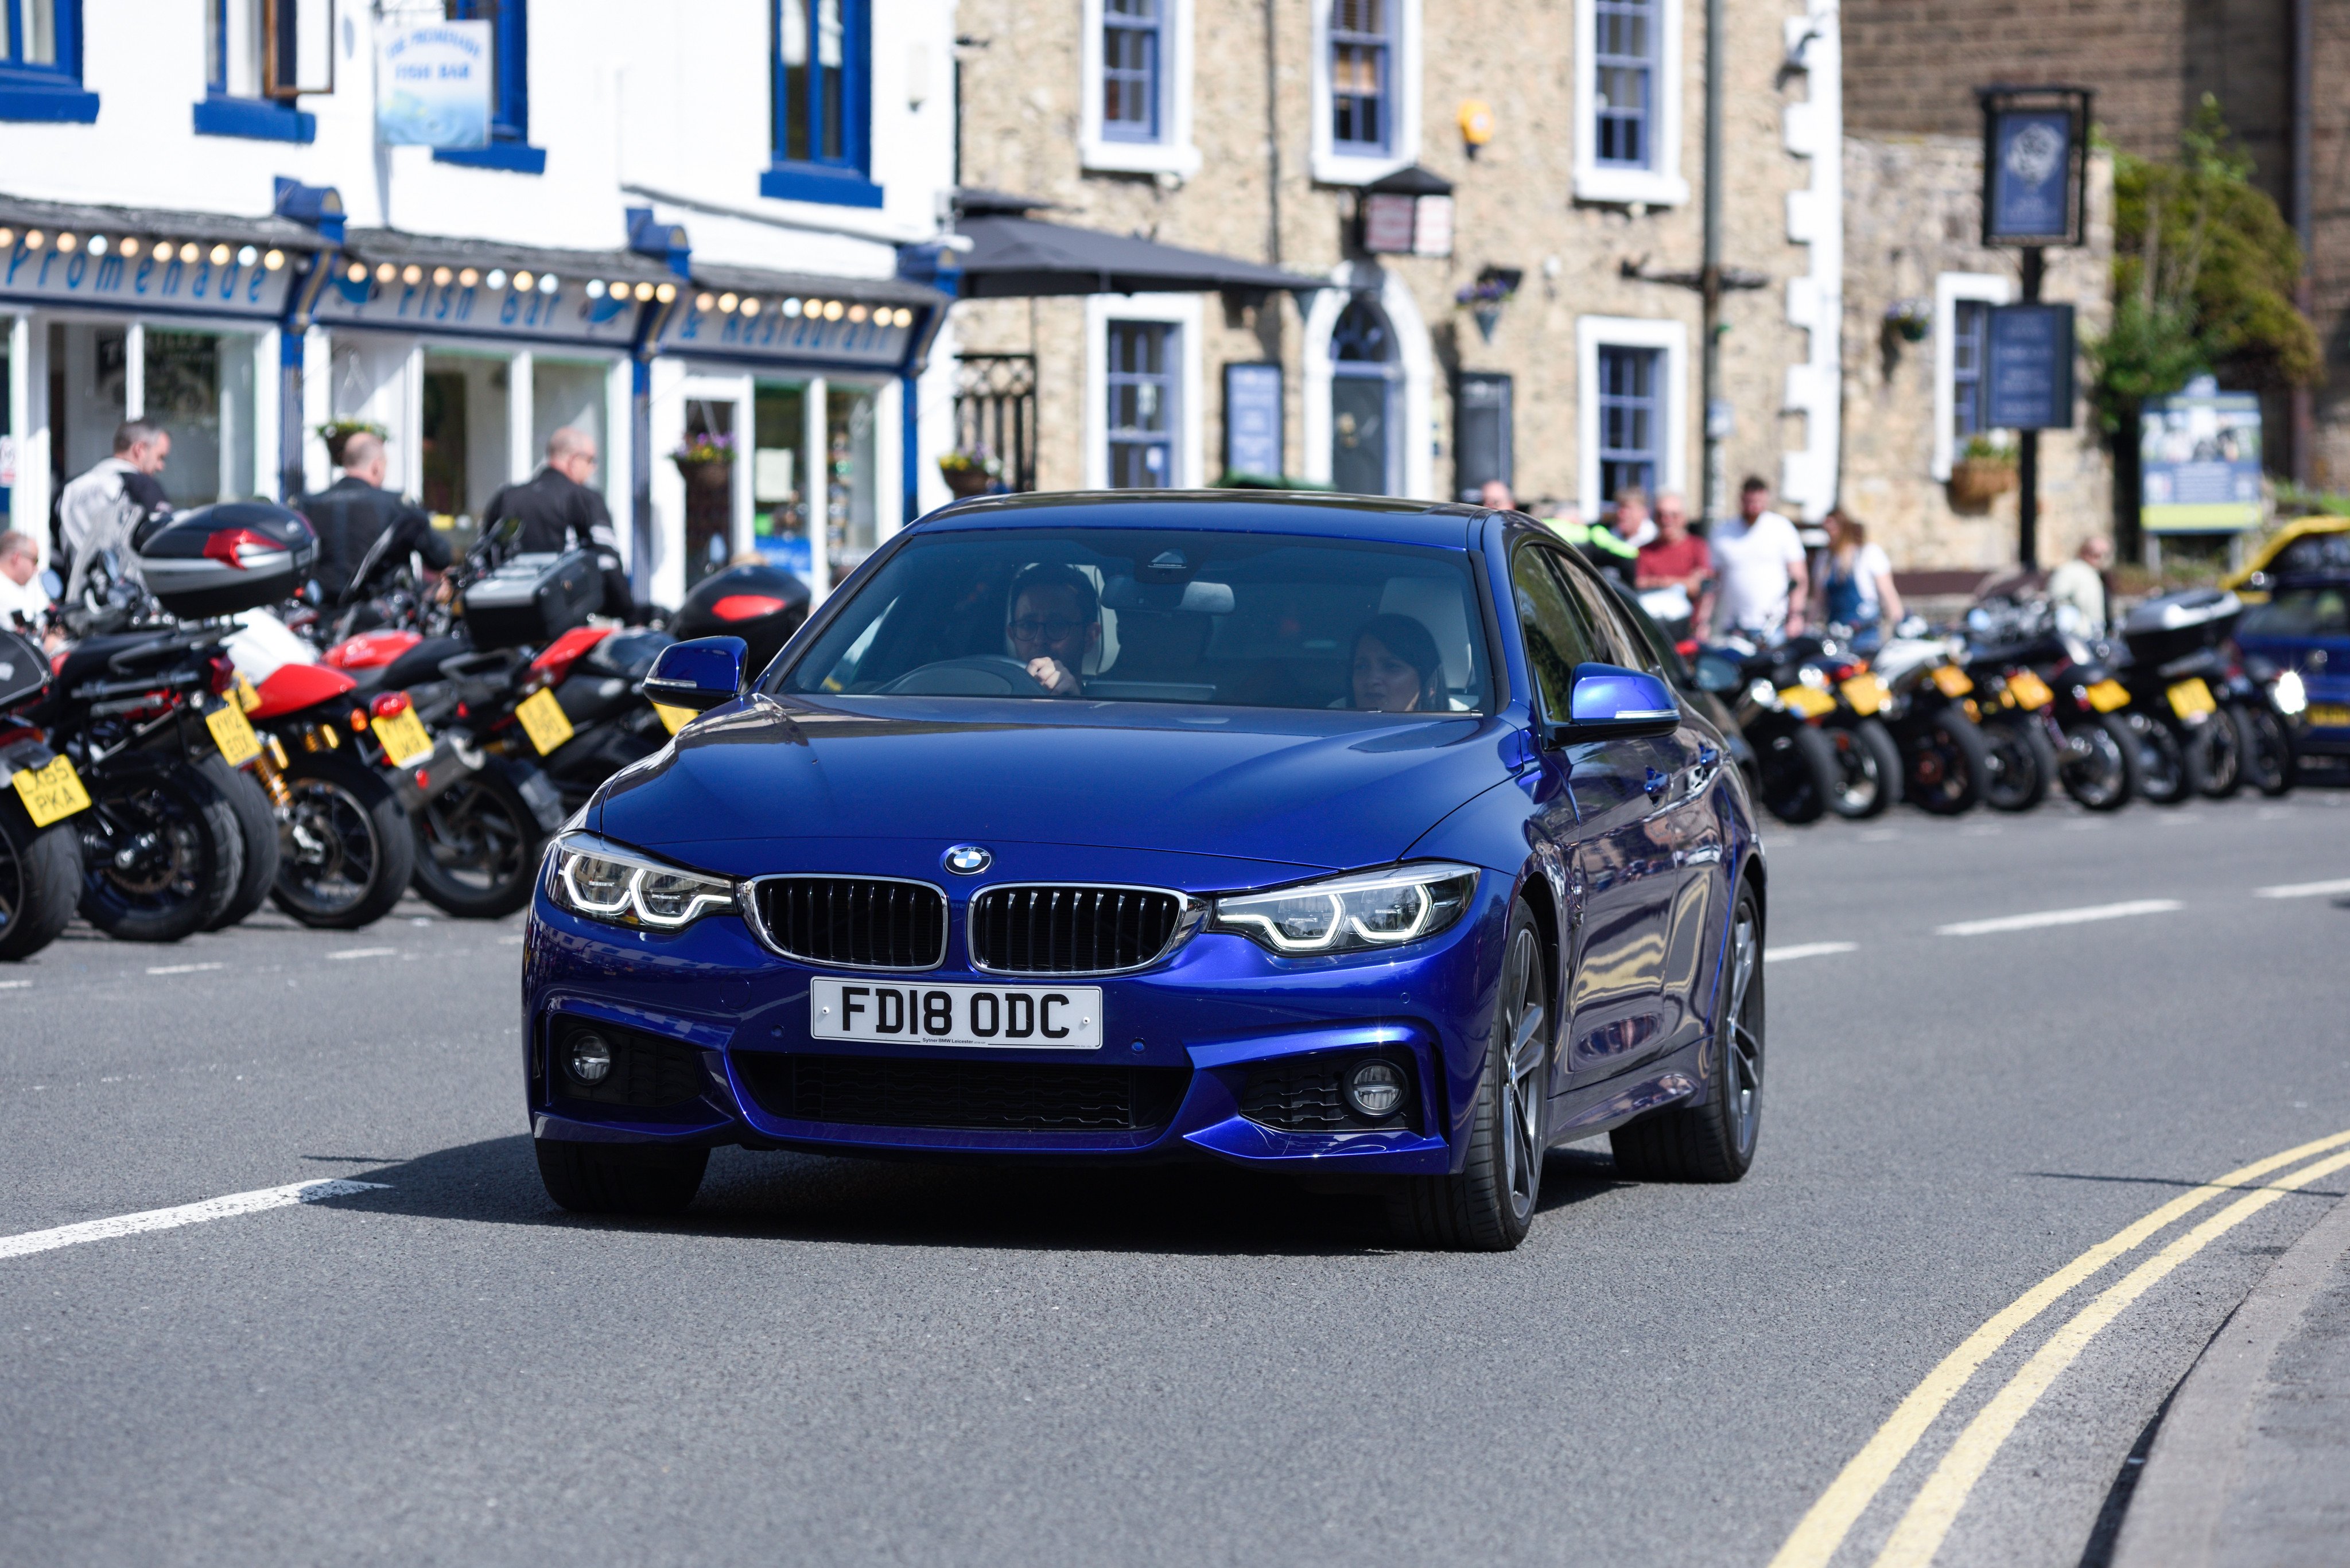 A BMW on a UK road. Drivers of these cars and another German marque, Audi, are the worst violators of speed limits, in the writer’s opinion, and potholes also contribute to make driving in Britain a misery at times. Photo: Shutterstock